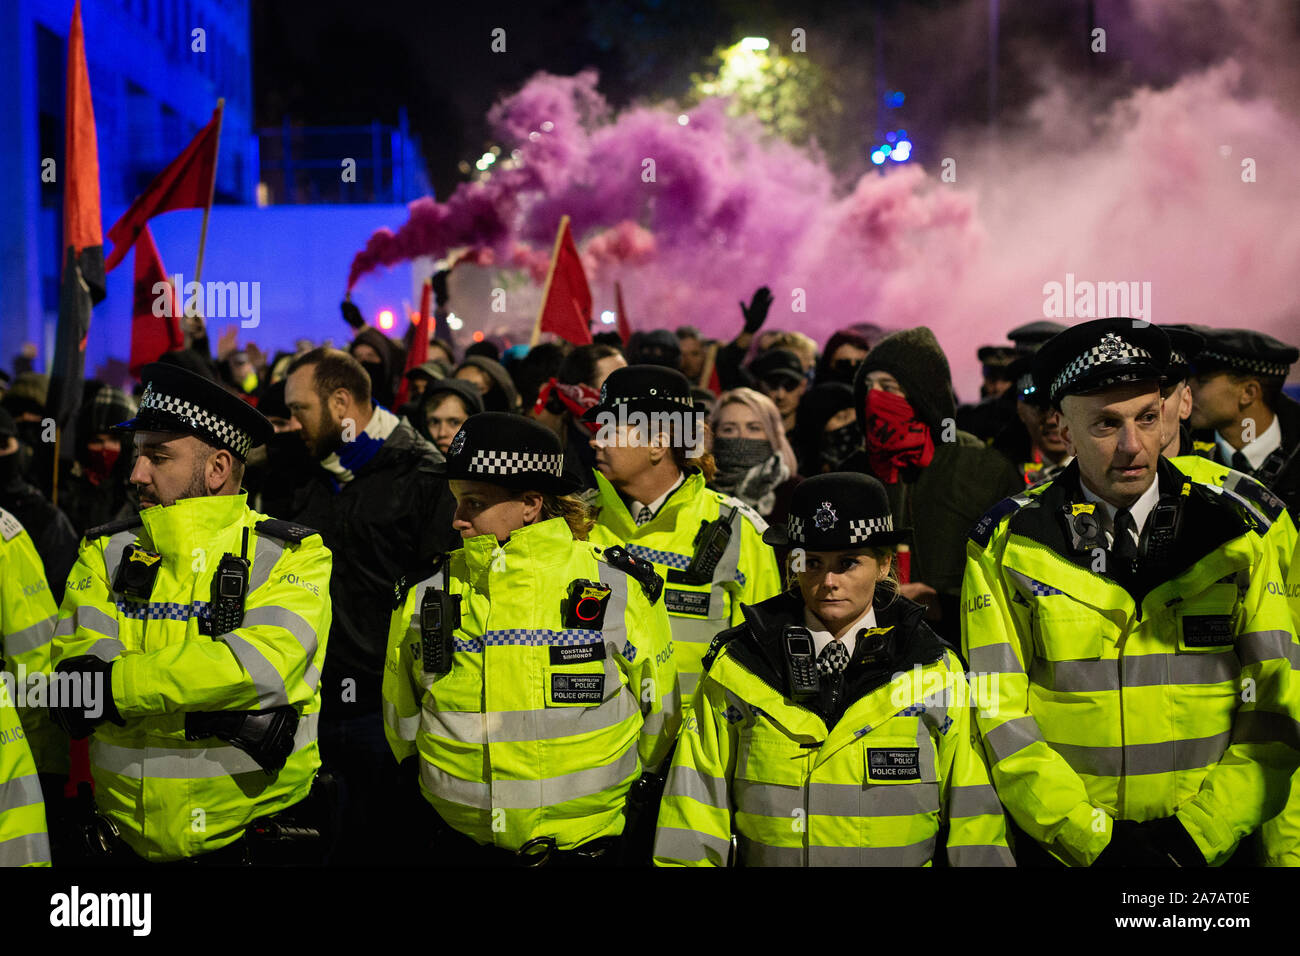 London, U.K. 31 October, 2019.The Anti-Fascist Assembly gathered in the city today to oppose organisations that have gathered due to the chaos centred around Brexit, and yet another extension. Andy Barton/Alamy Live News Stock Photo